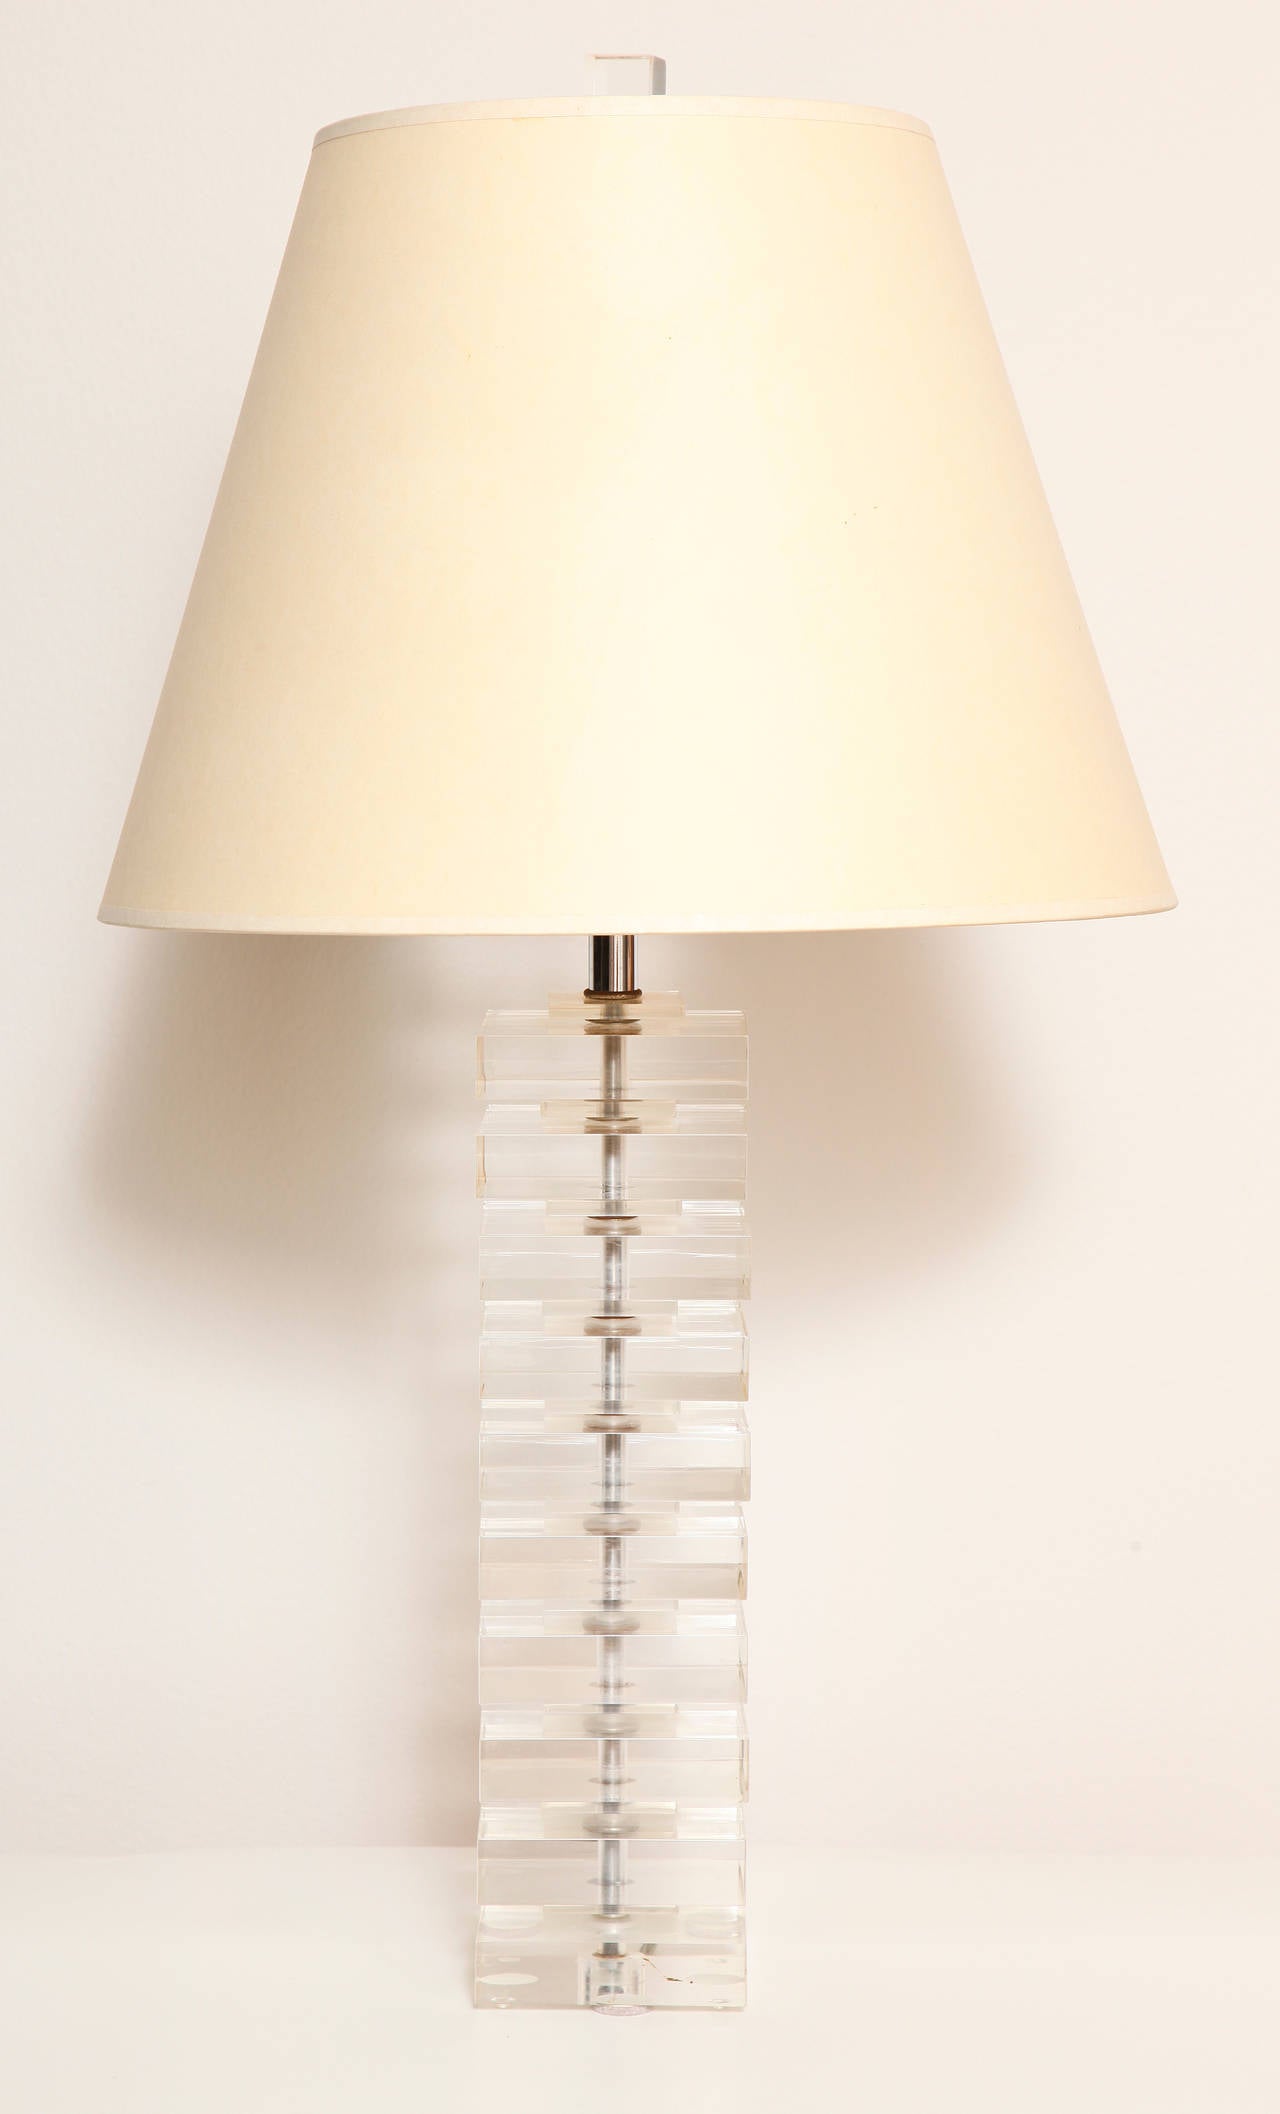 An elegantly proportioned stacked 1970s lucite table lamp.